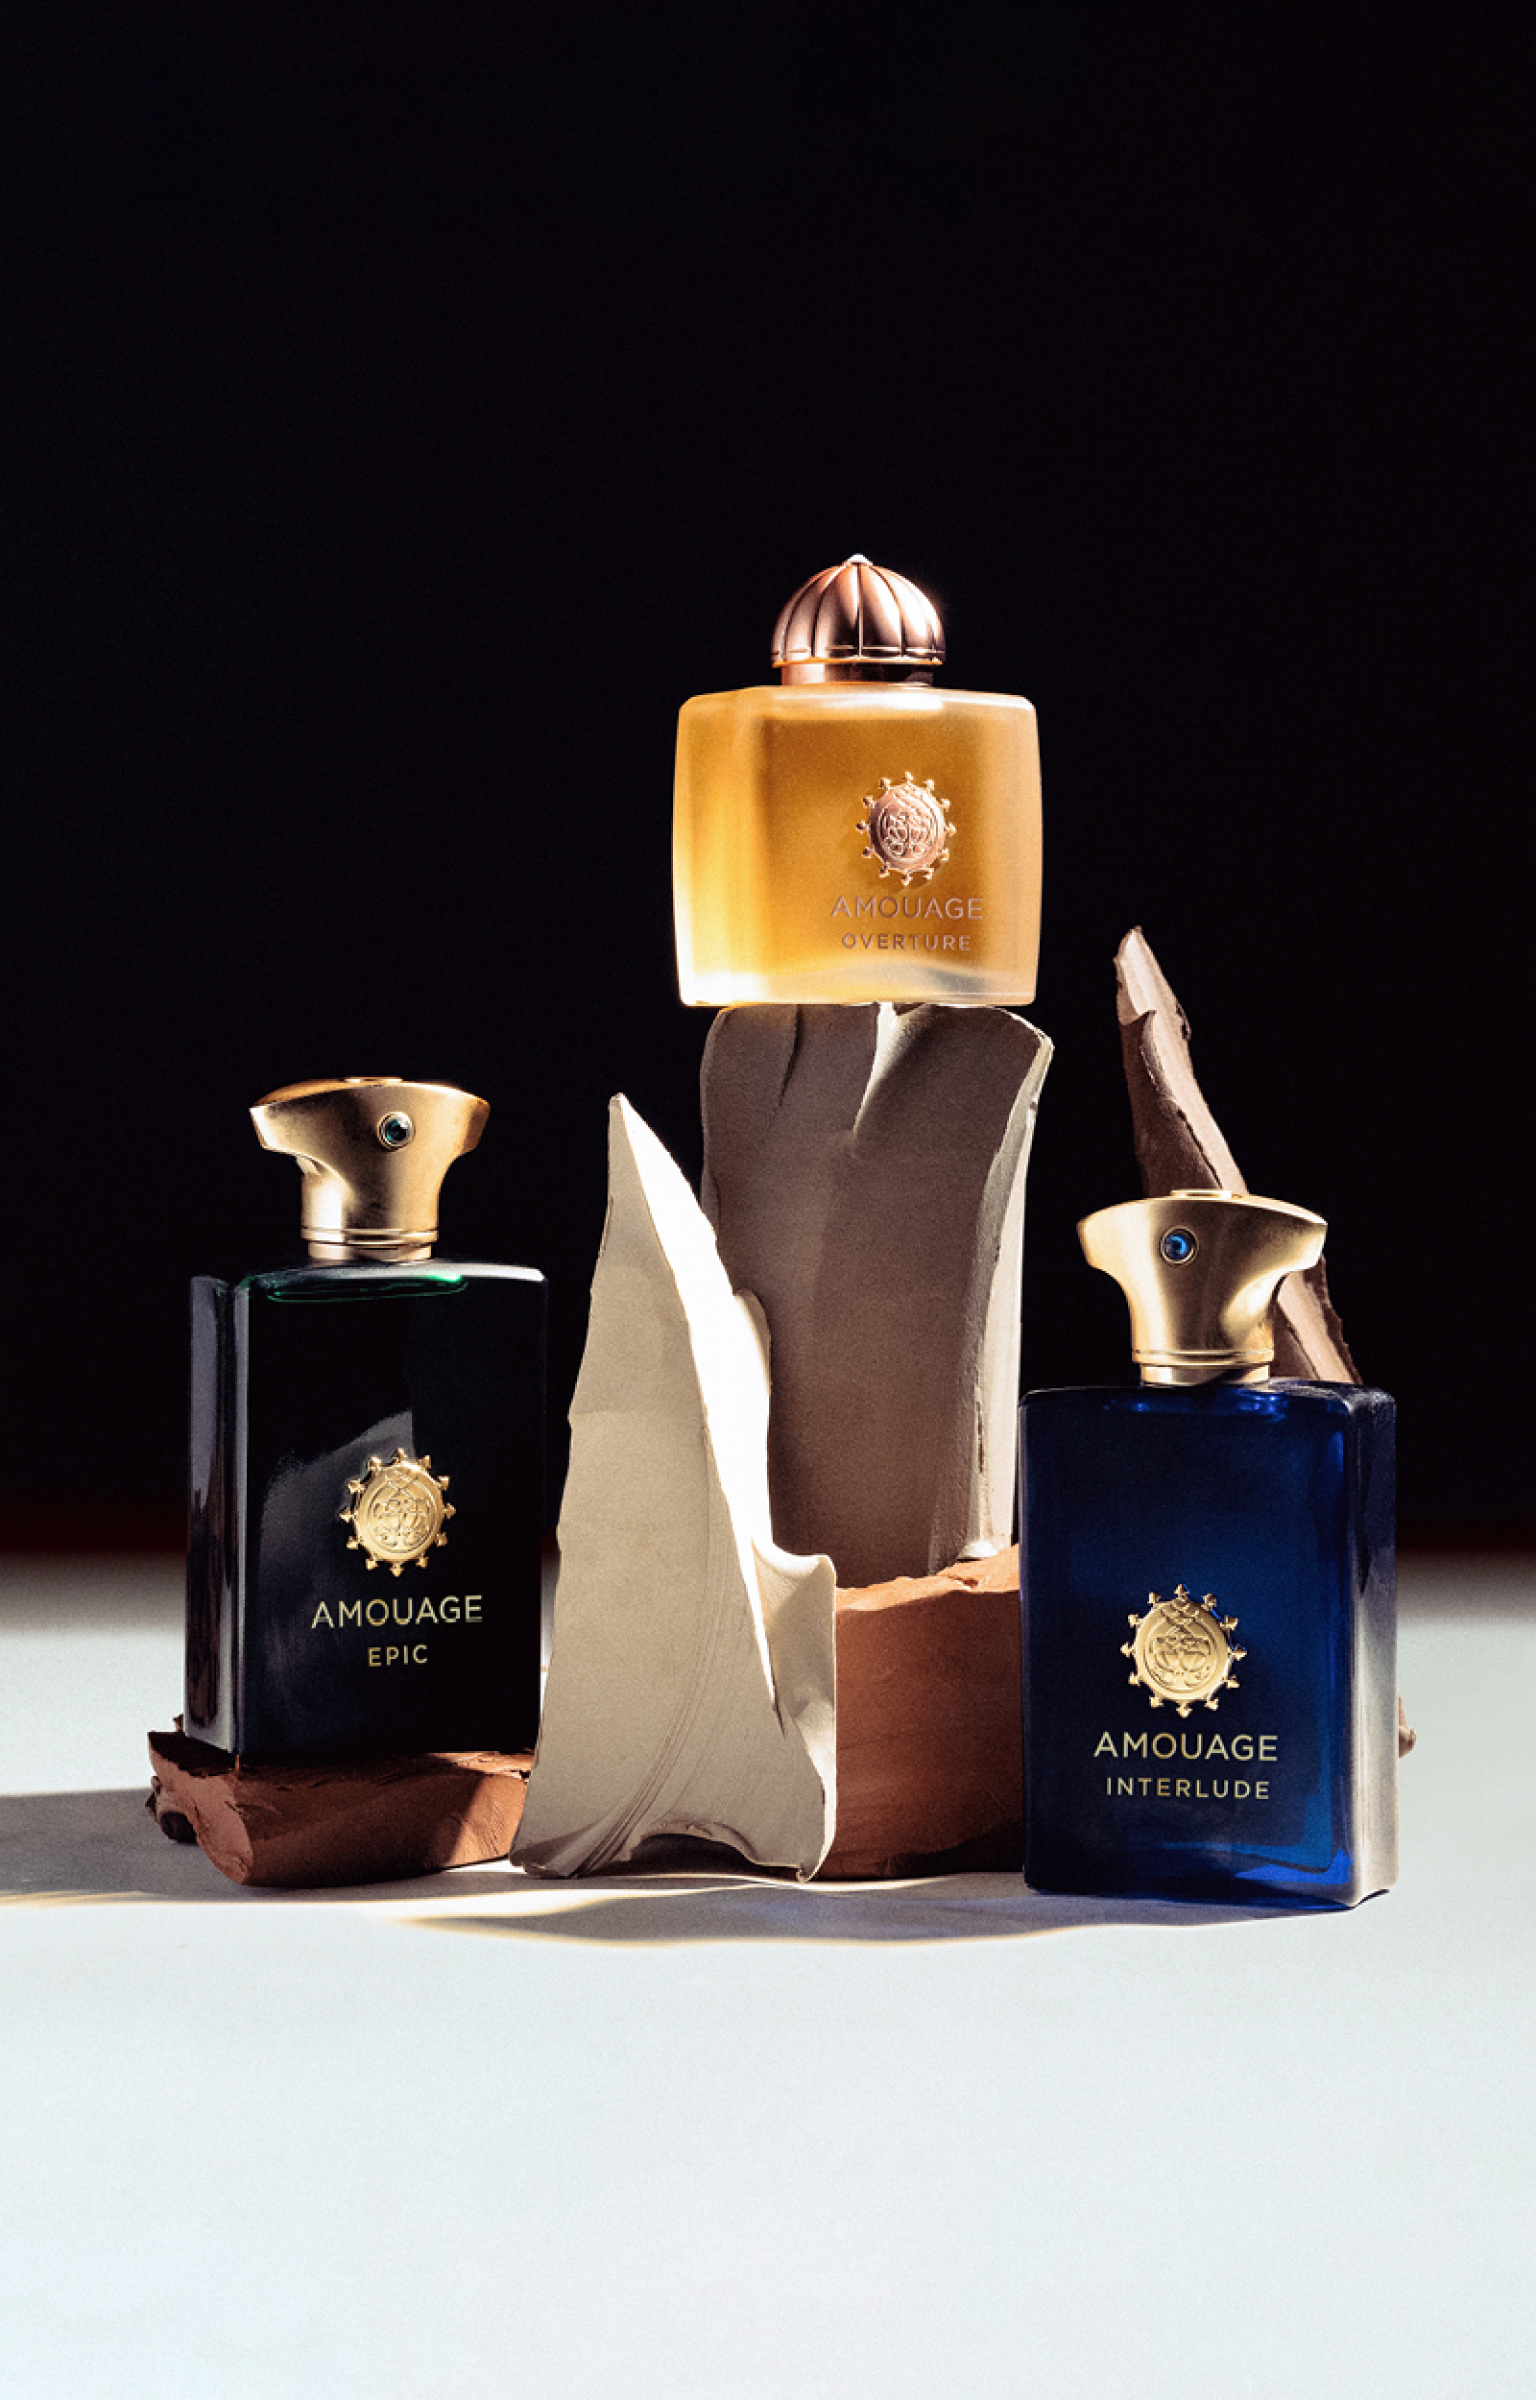 The House of Amouage